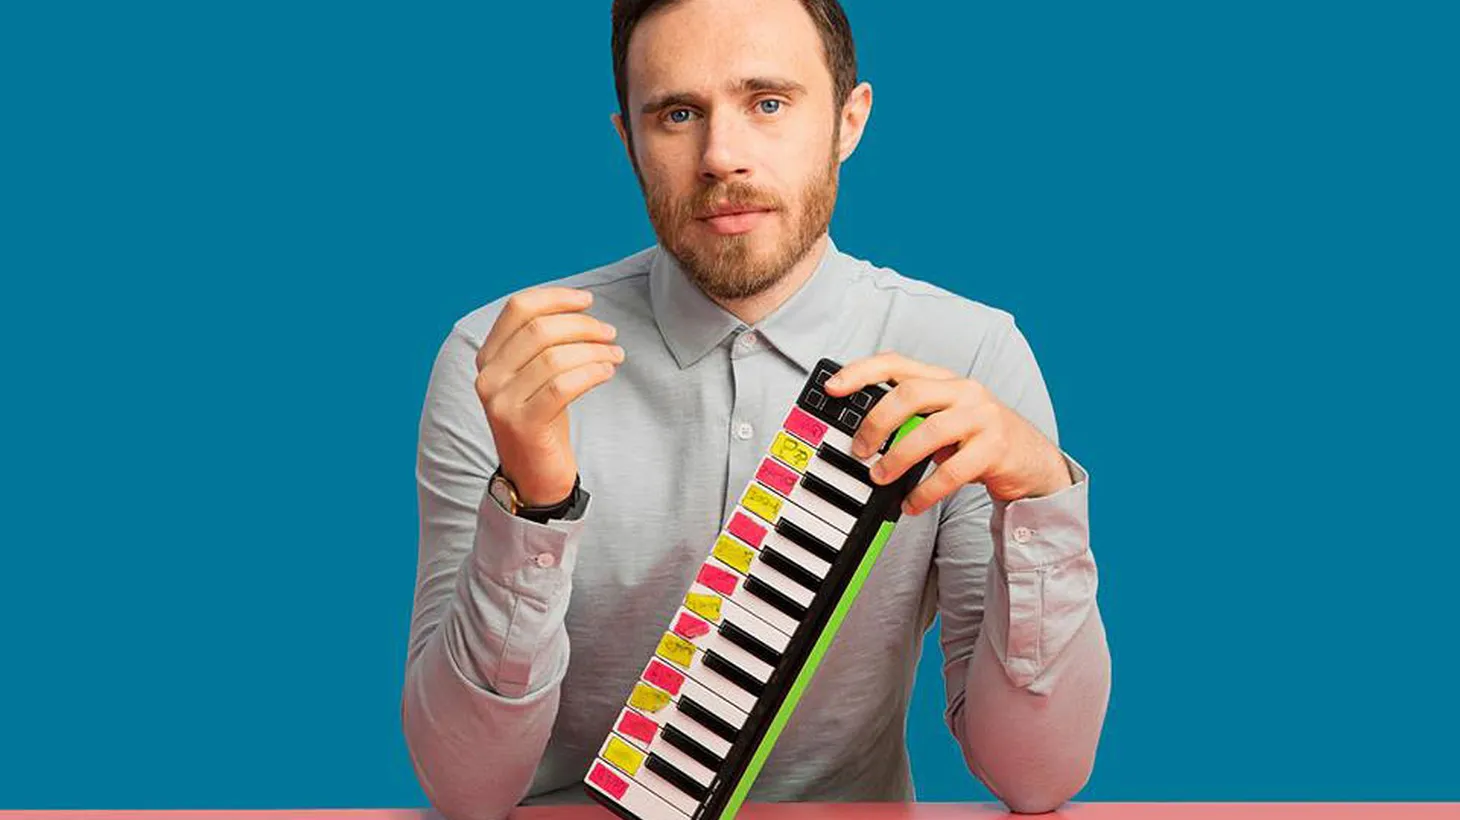 Irish singer/songwriter James Vincent McMorrow made a sonic shift on his new album by infusing his songs with R&B and electronic elements.